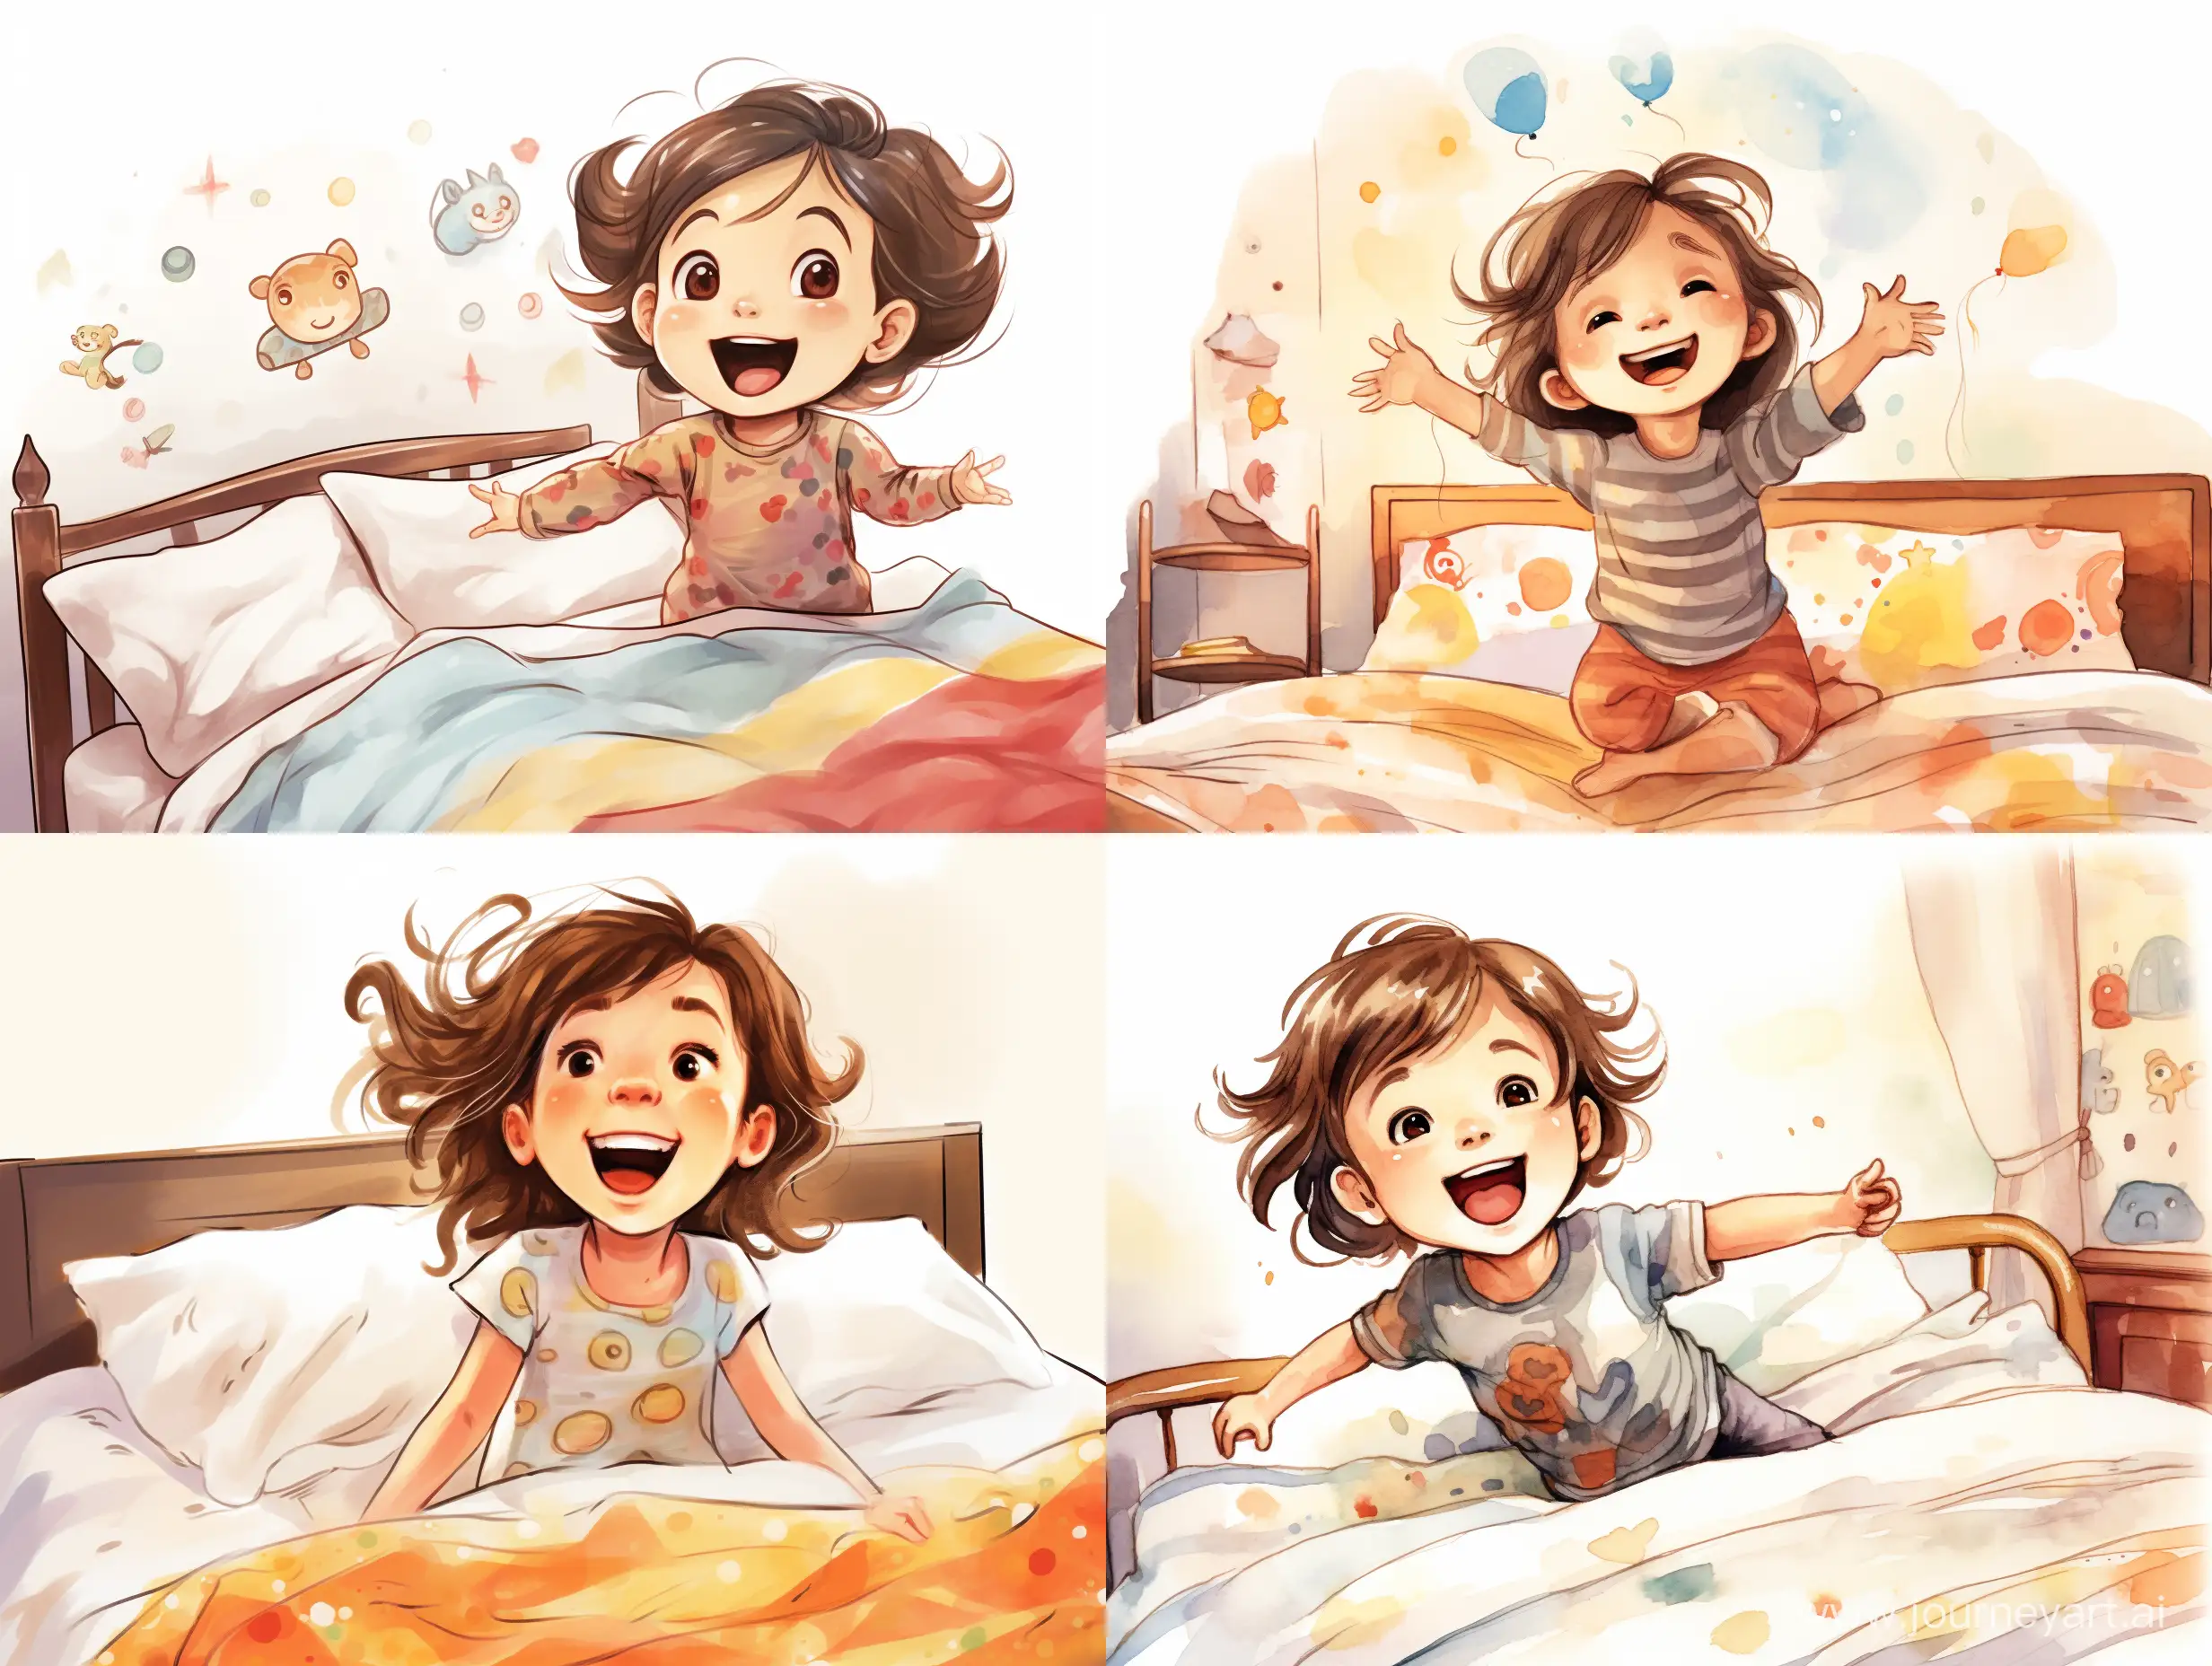 A three-year-old girl, light brown hair above her shoulders, with brown eyes, long eyelashes, small mouth, thin lips, joyfully, jumping on a sick bed, laughing, stylized caricature, decorative, flat illustration, on a white background, watercolor, ink, Victor Ngai style, bright colors